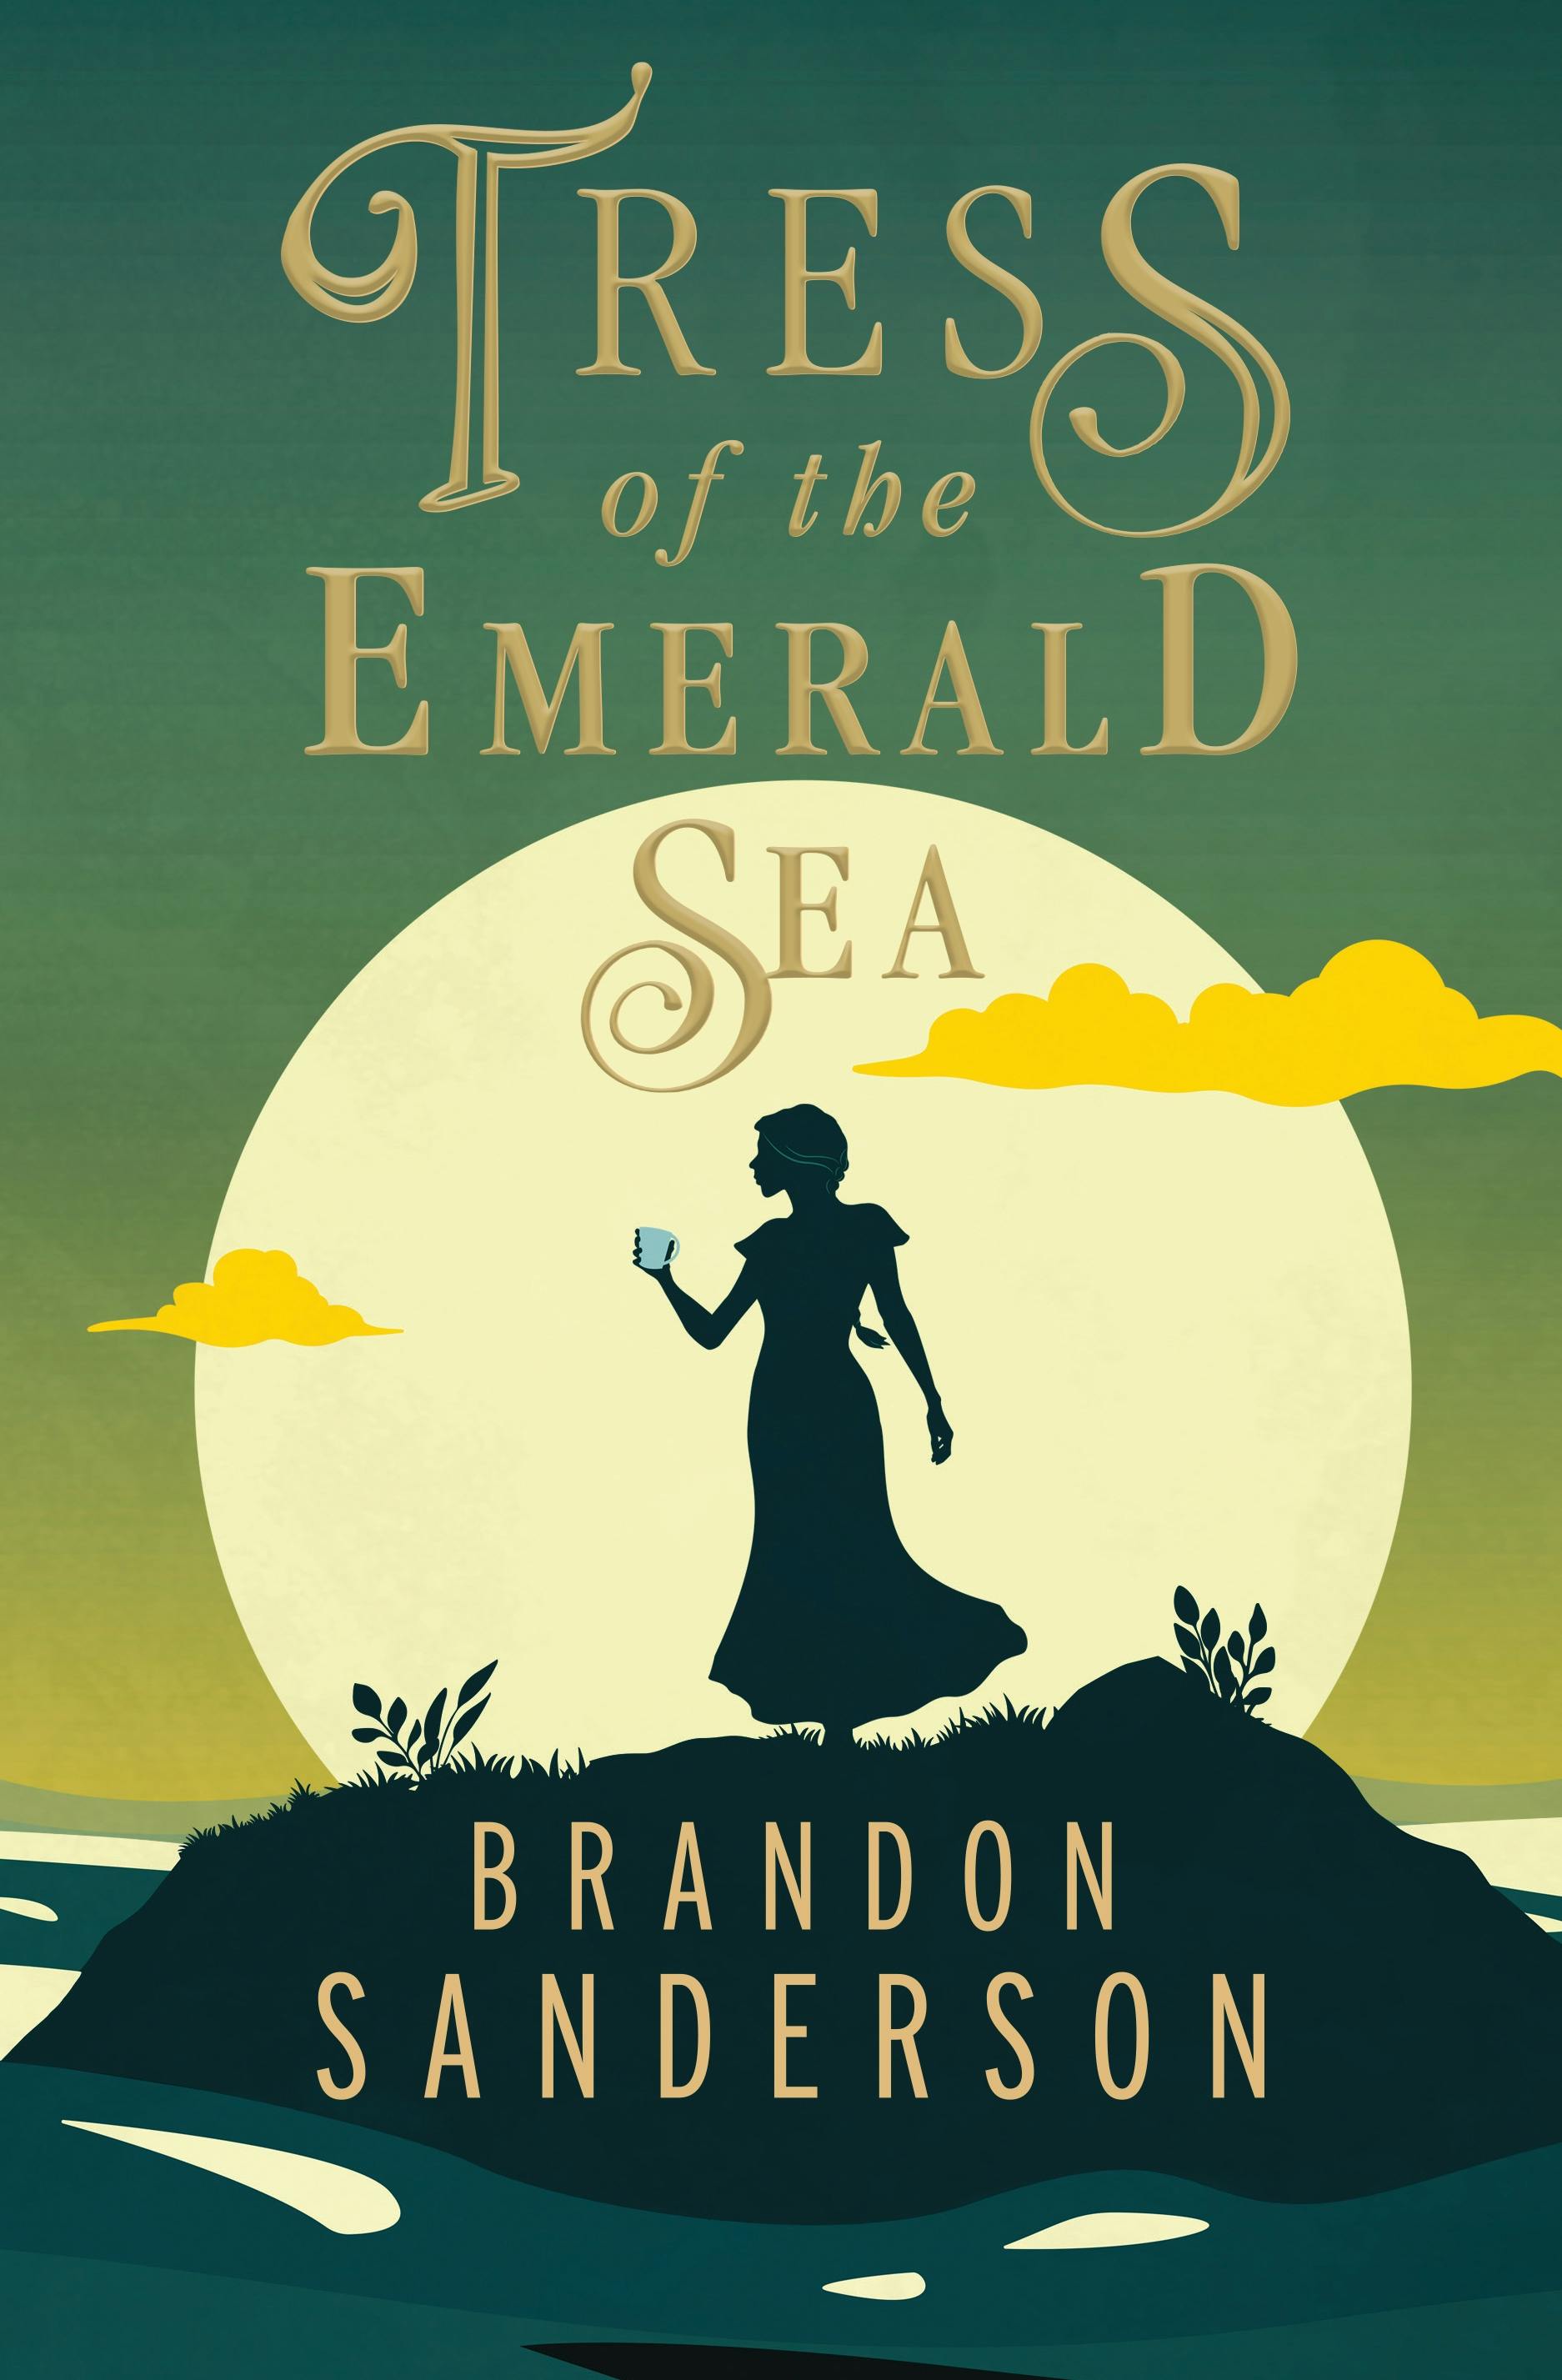 Cover for the book titled as: Tress of the Emerald Sea